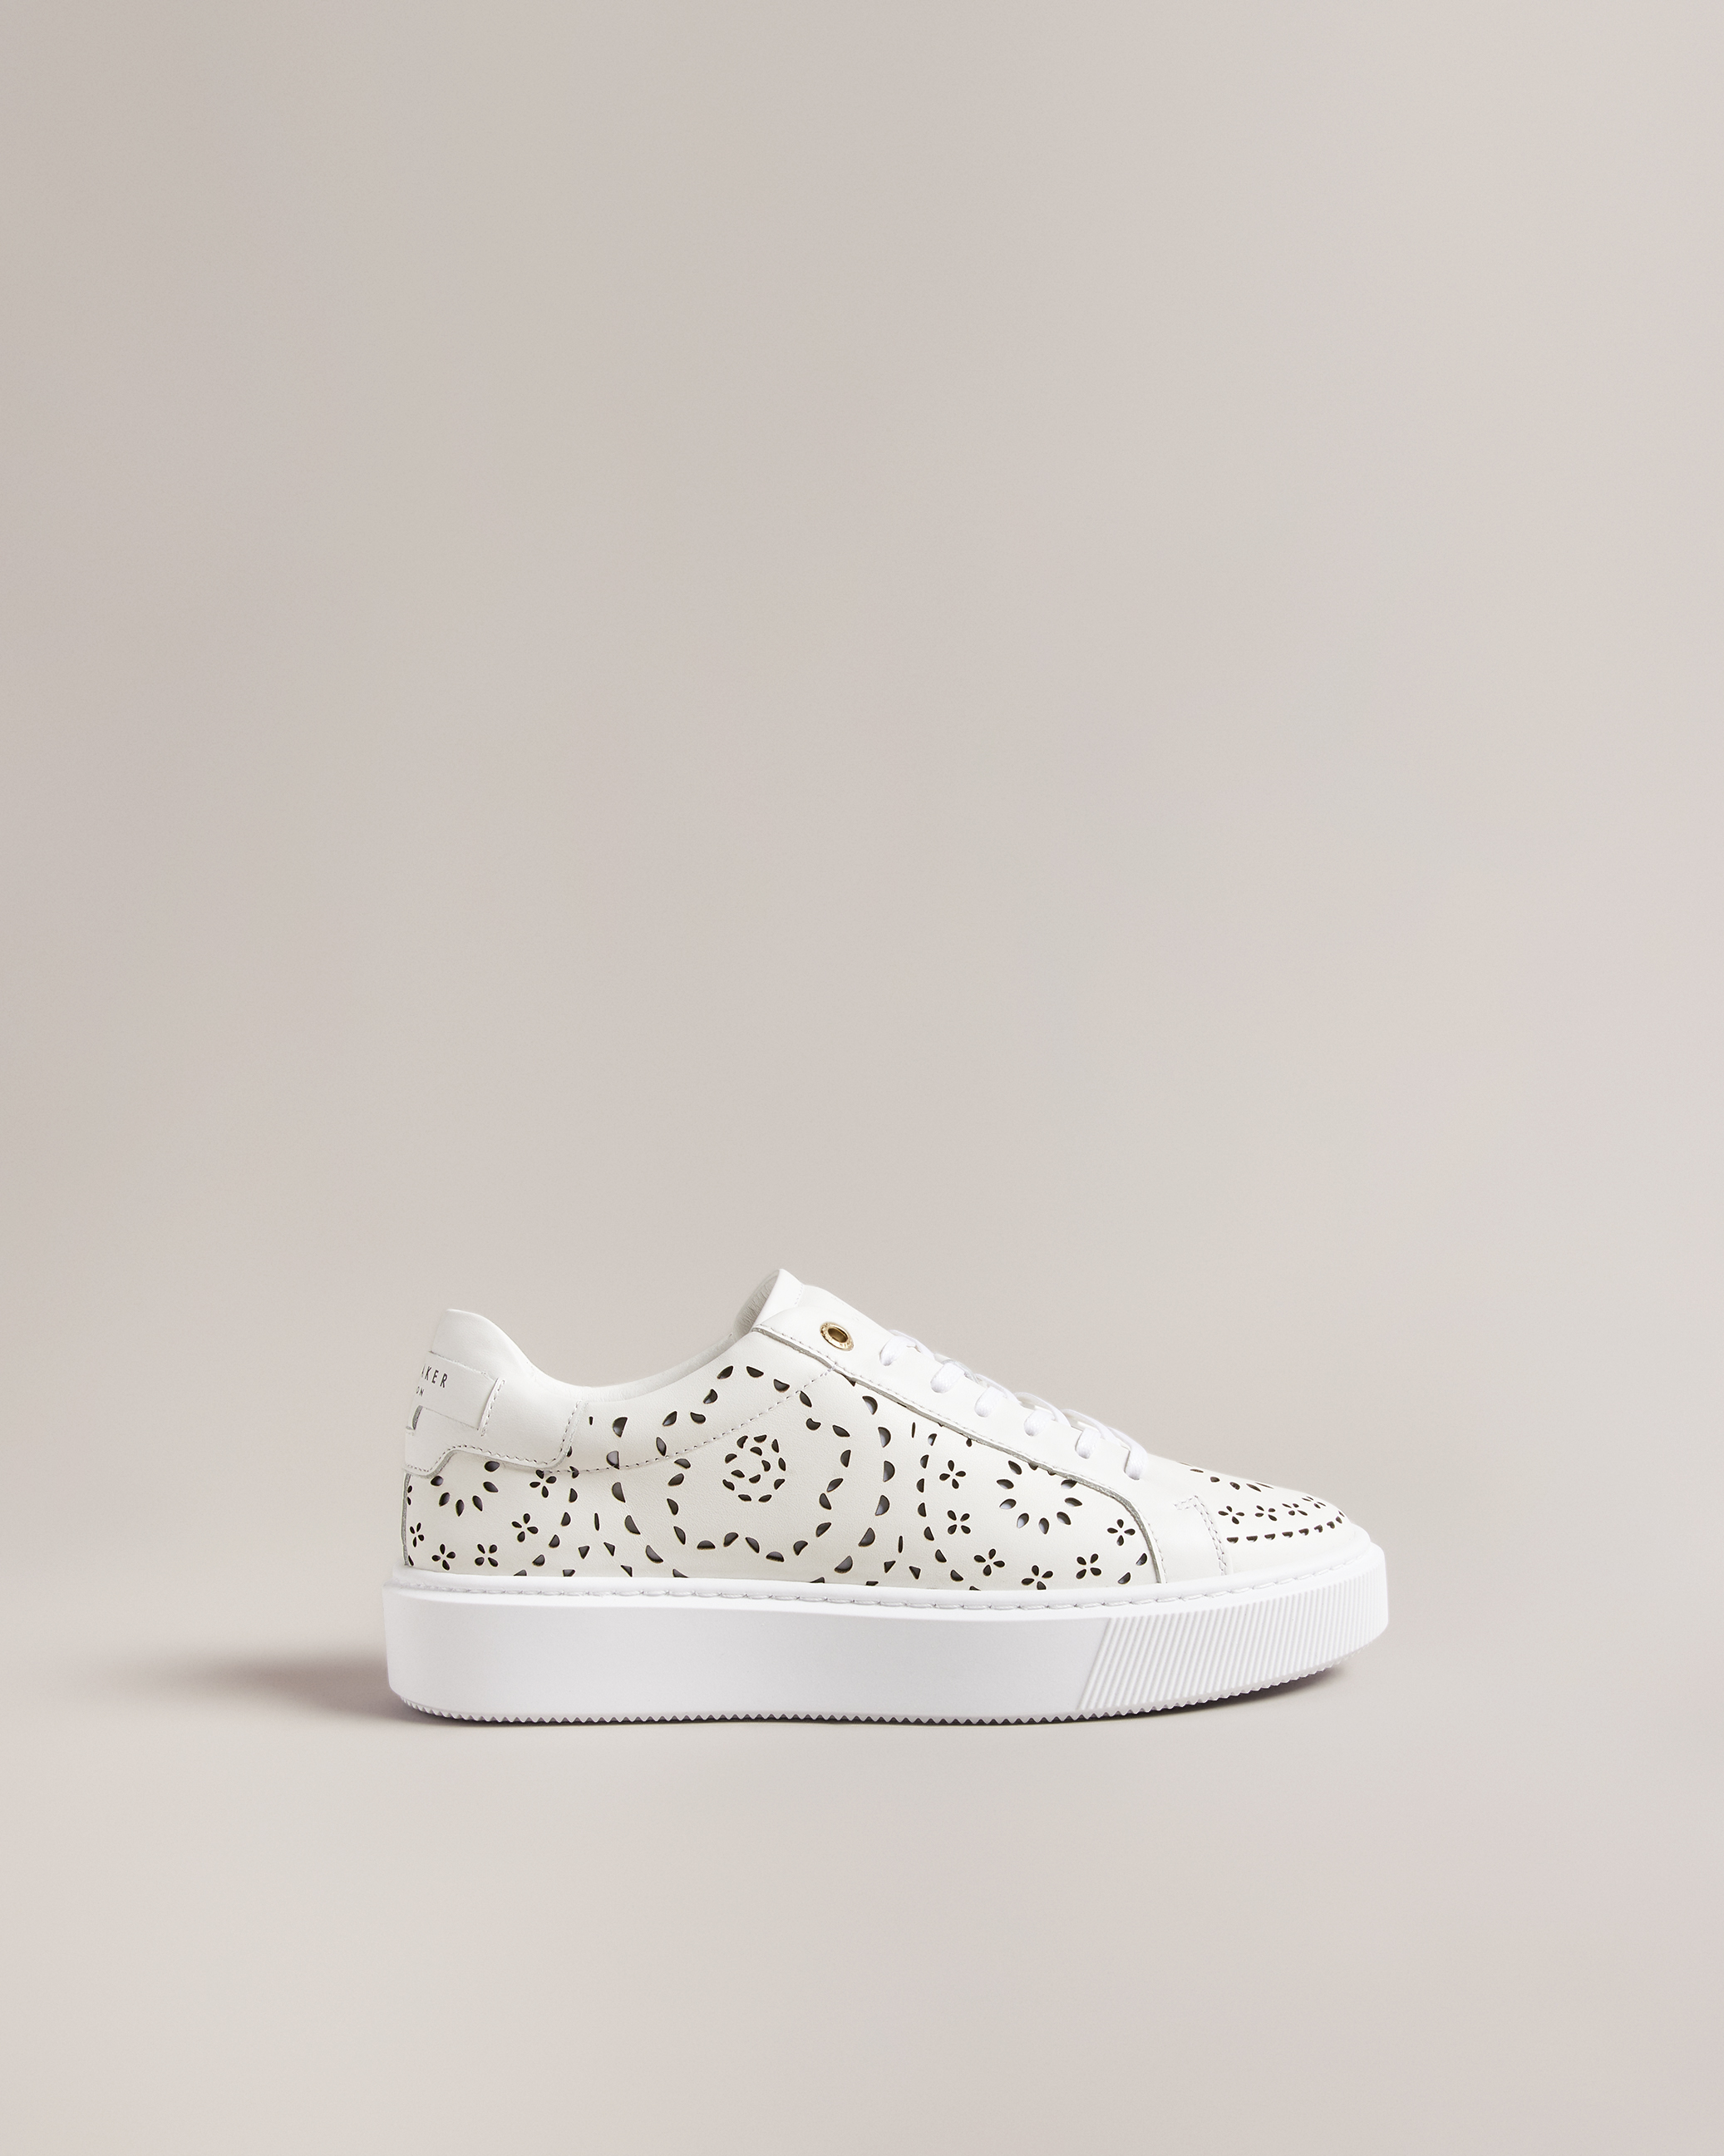 Traditie Wieg Sluier Womens Designer Trainers | Floral Trainers | Ted Baker ROW